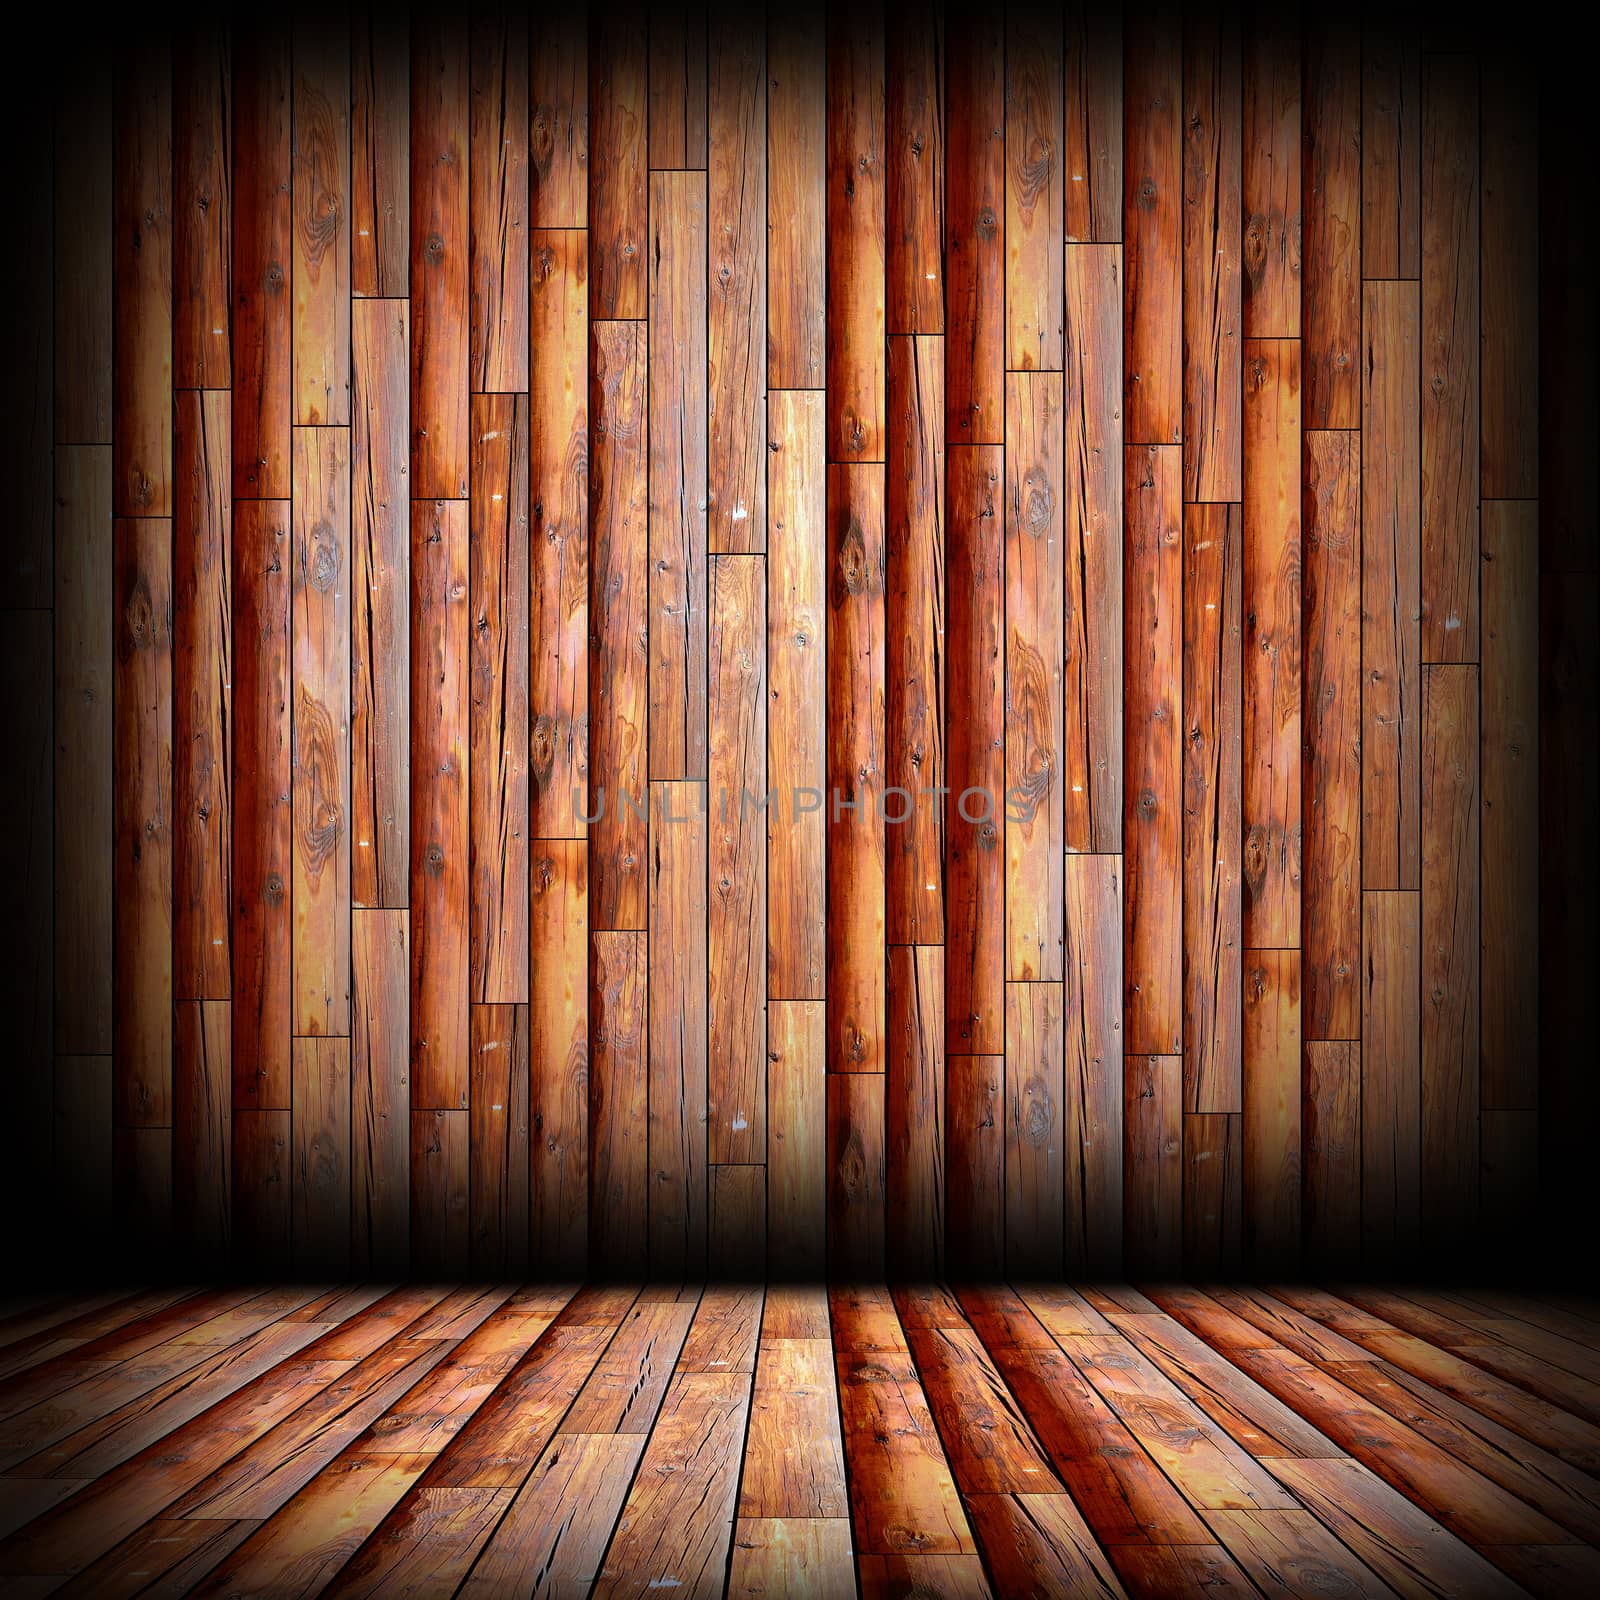 brown boards on wall and floor, abstract interior architectural empty  backdrop with vignette